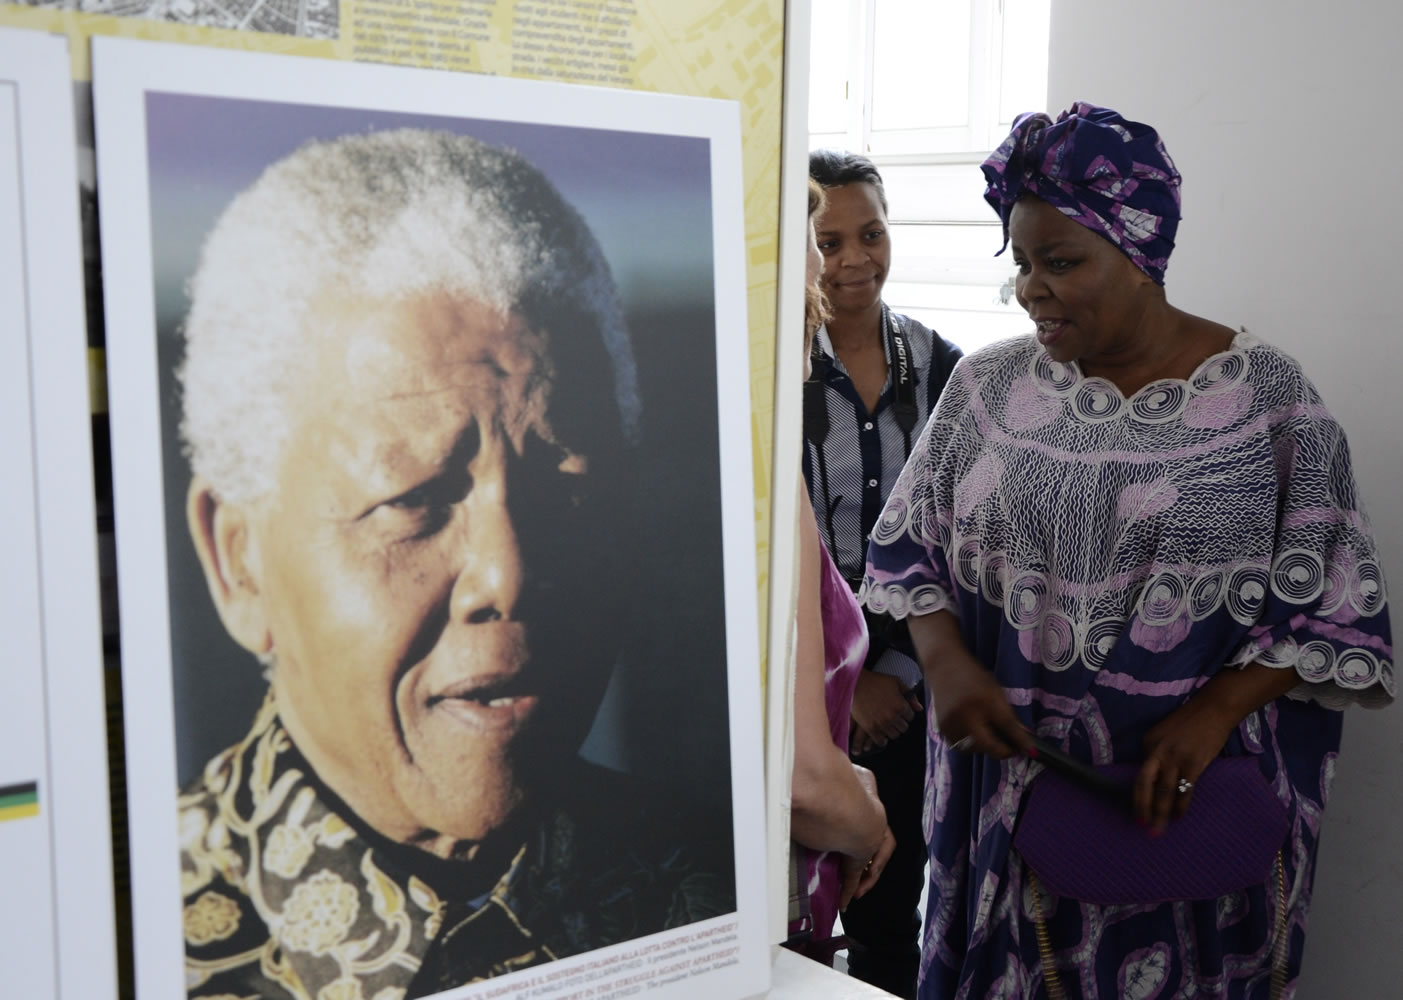 South Africa's ambassador to Italy Nomatemba Tambo attends an exhibition organized by an anti-racism center on the occasion of the 95th birthday of Nelson Mandela in Rome on Thursday.